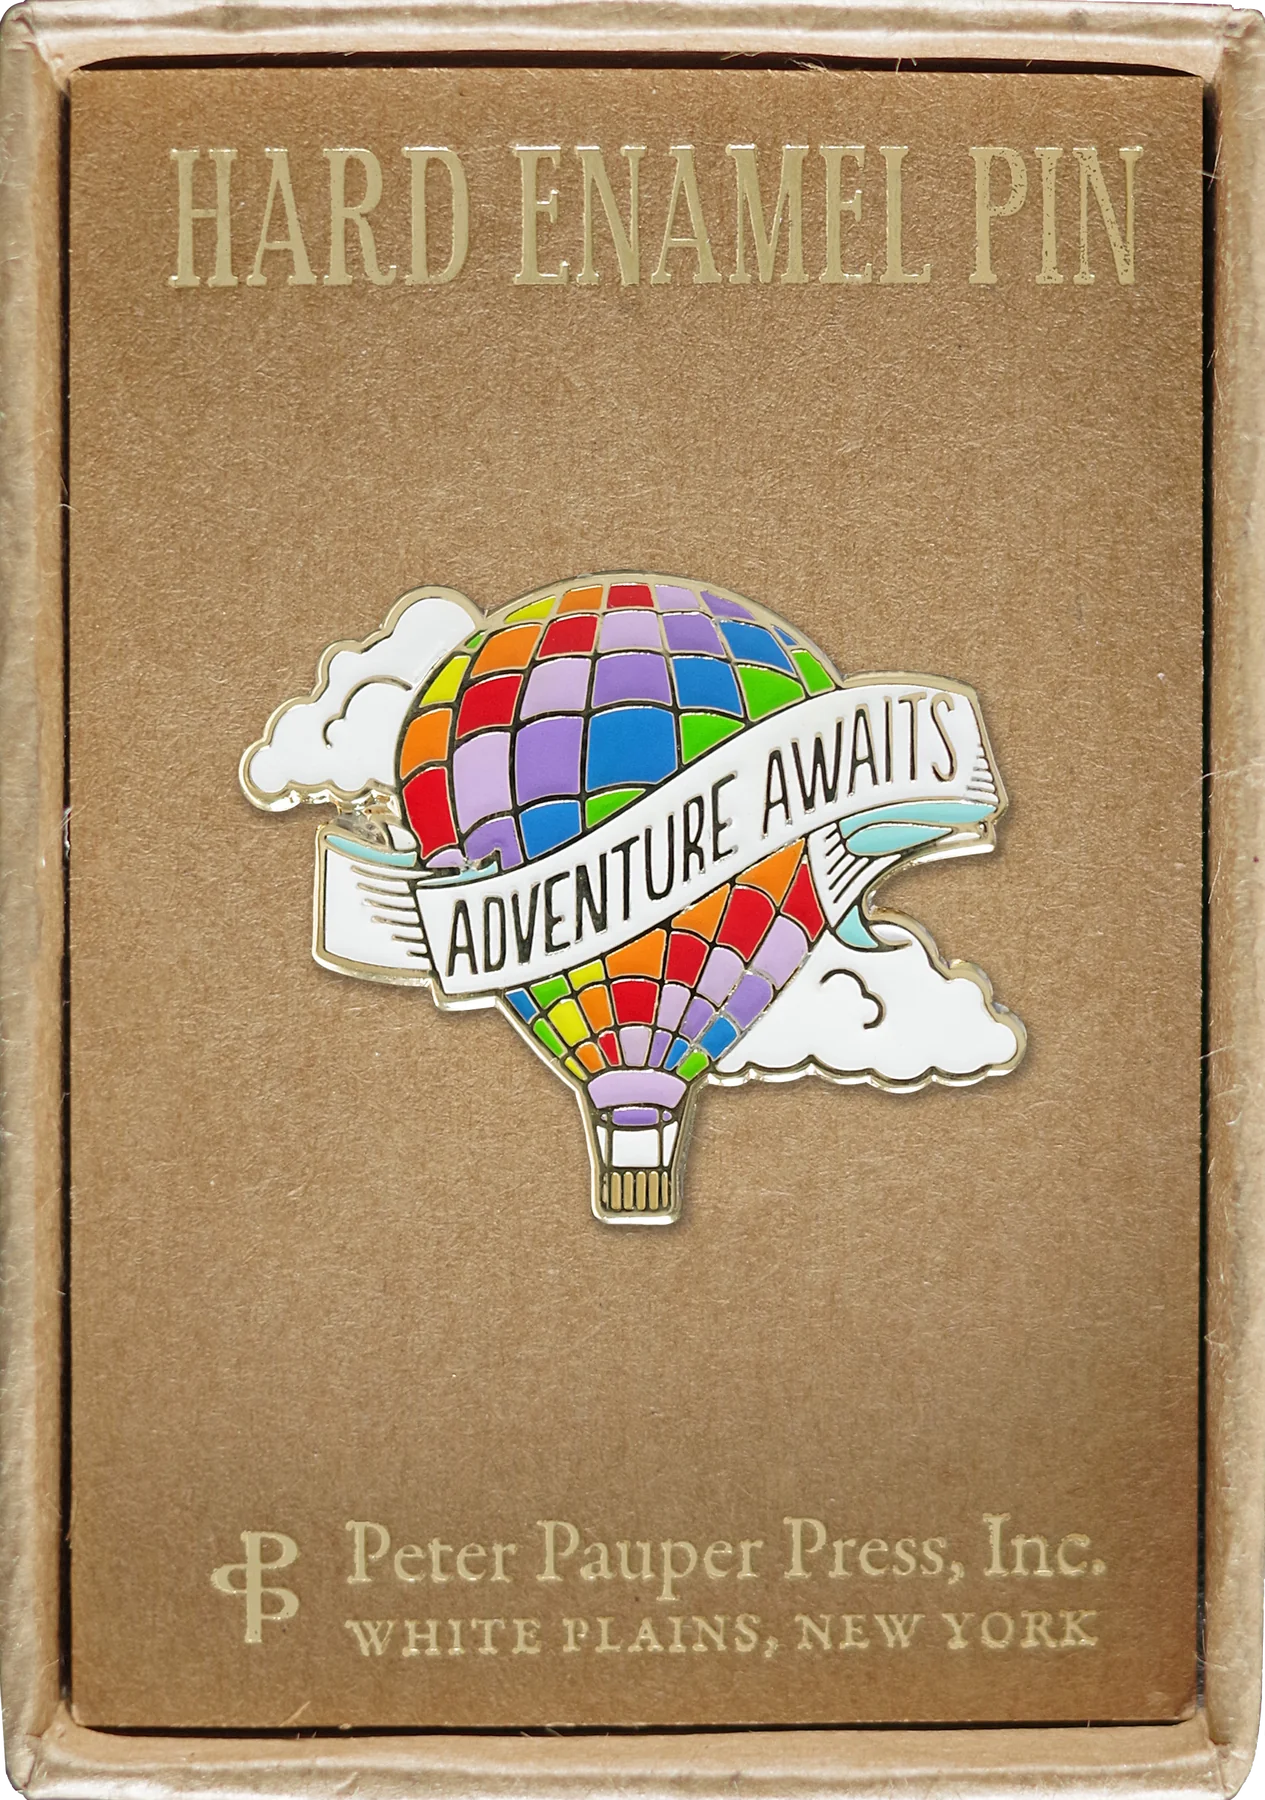 Multi-coloured hot air balloon with clouds behind it and awhite banner in front that says adventure awaits pinned onto a box that says 'hard enamel pin'